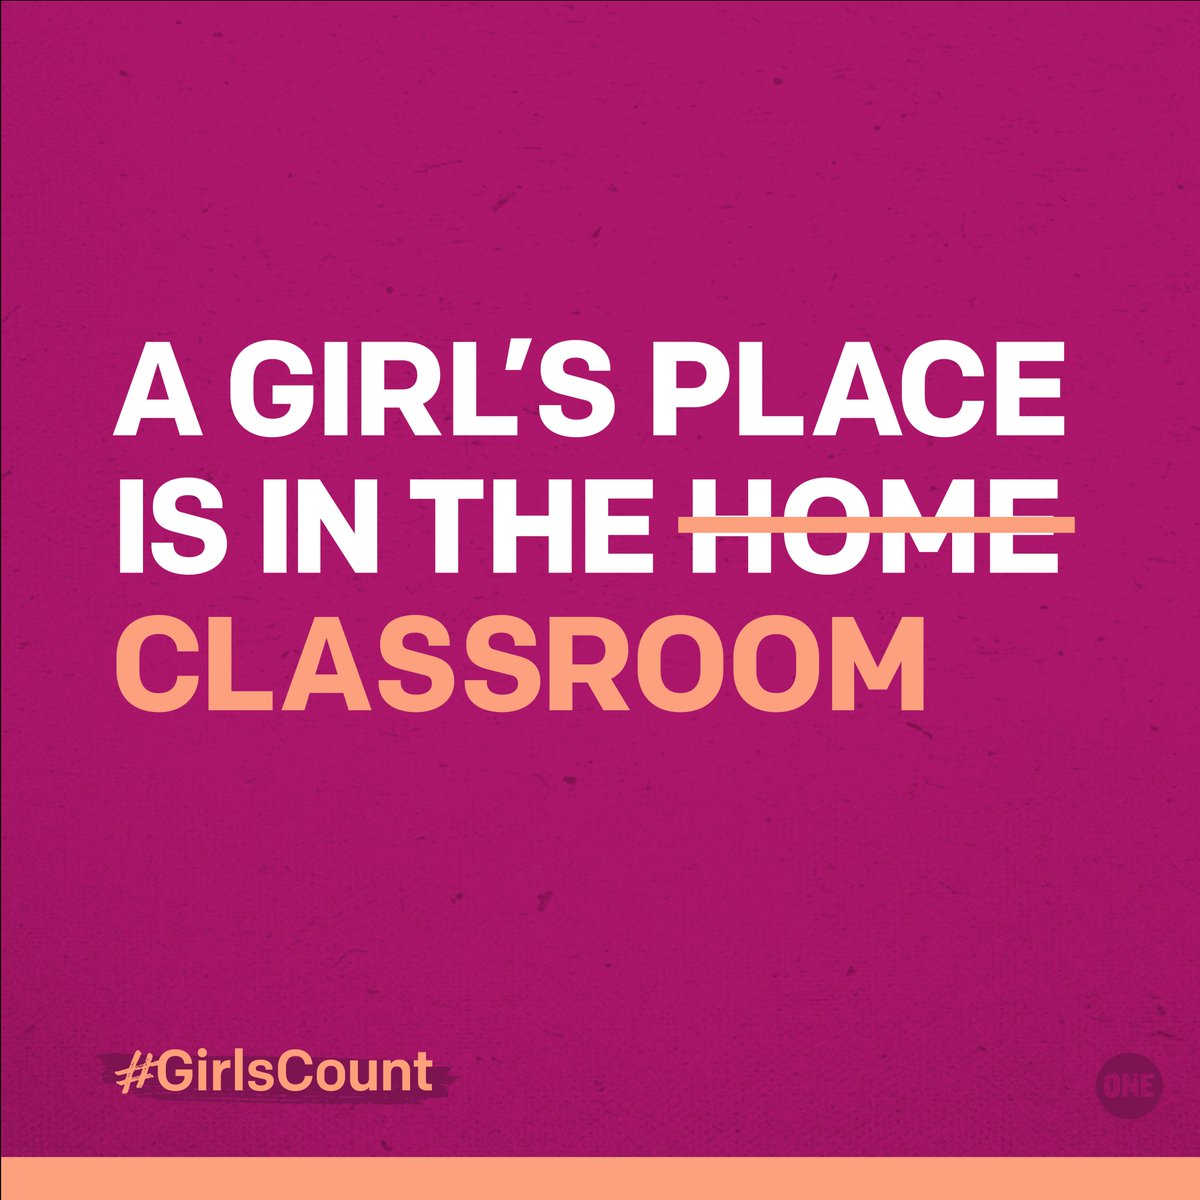 All #GirlsCount. All girls deserve an education. That’s why I'm counting with @ONECampaign . https://t.co/xX1xrCDor9 https://t.co/RNWJMgRCw7